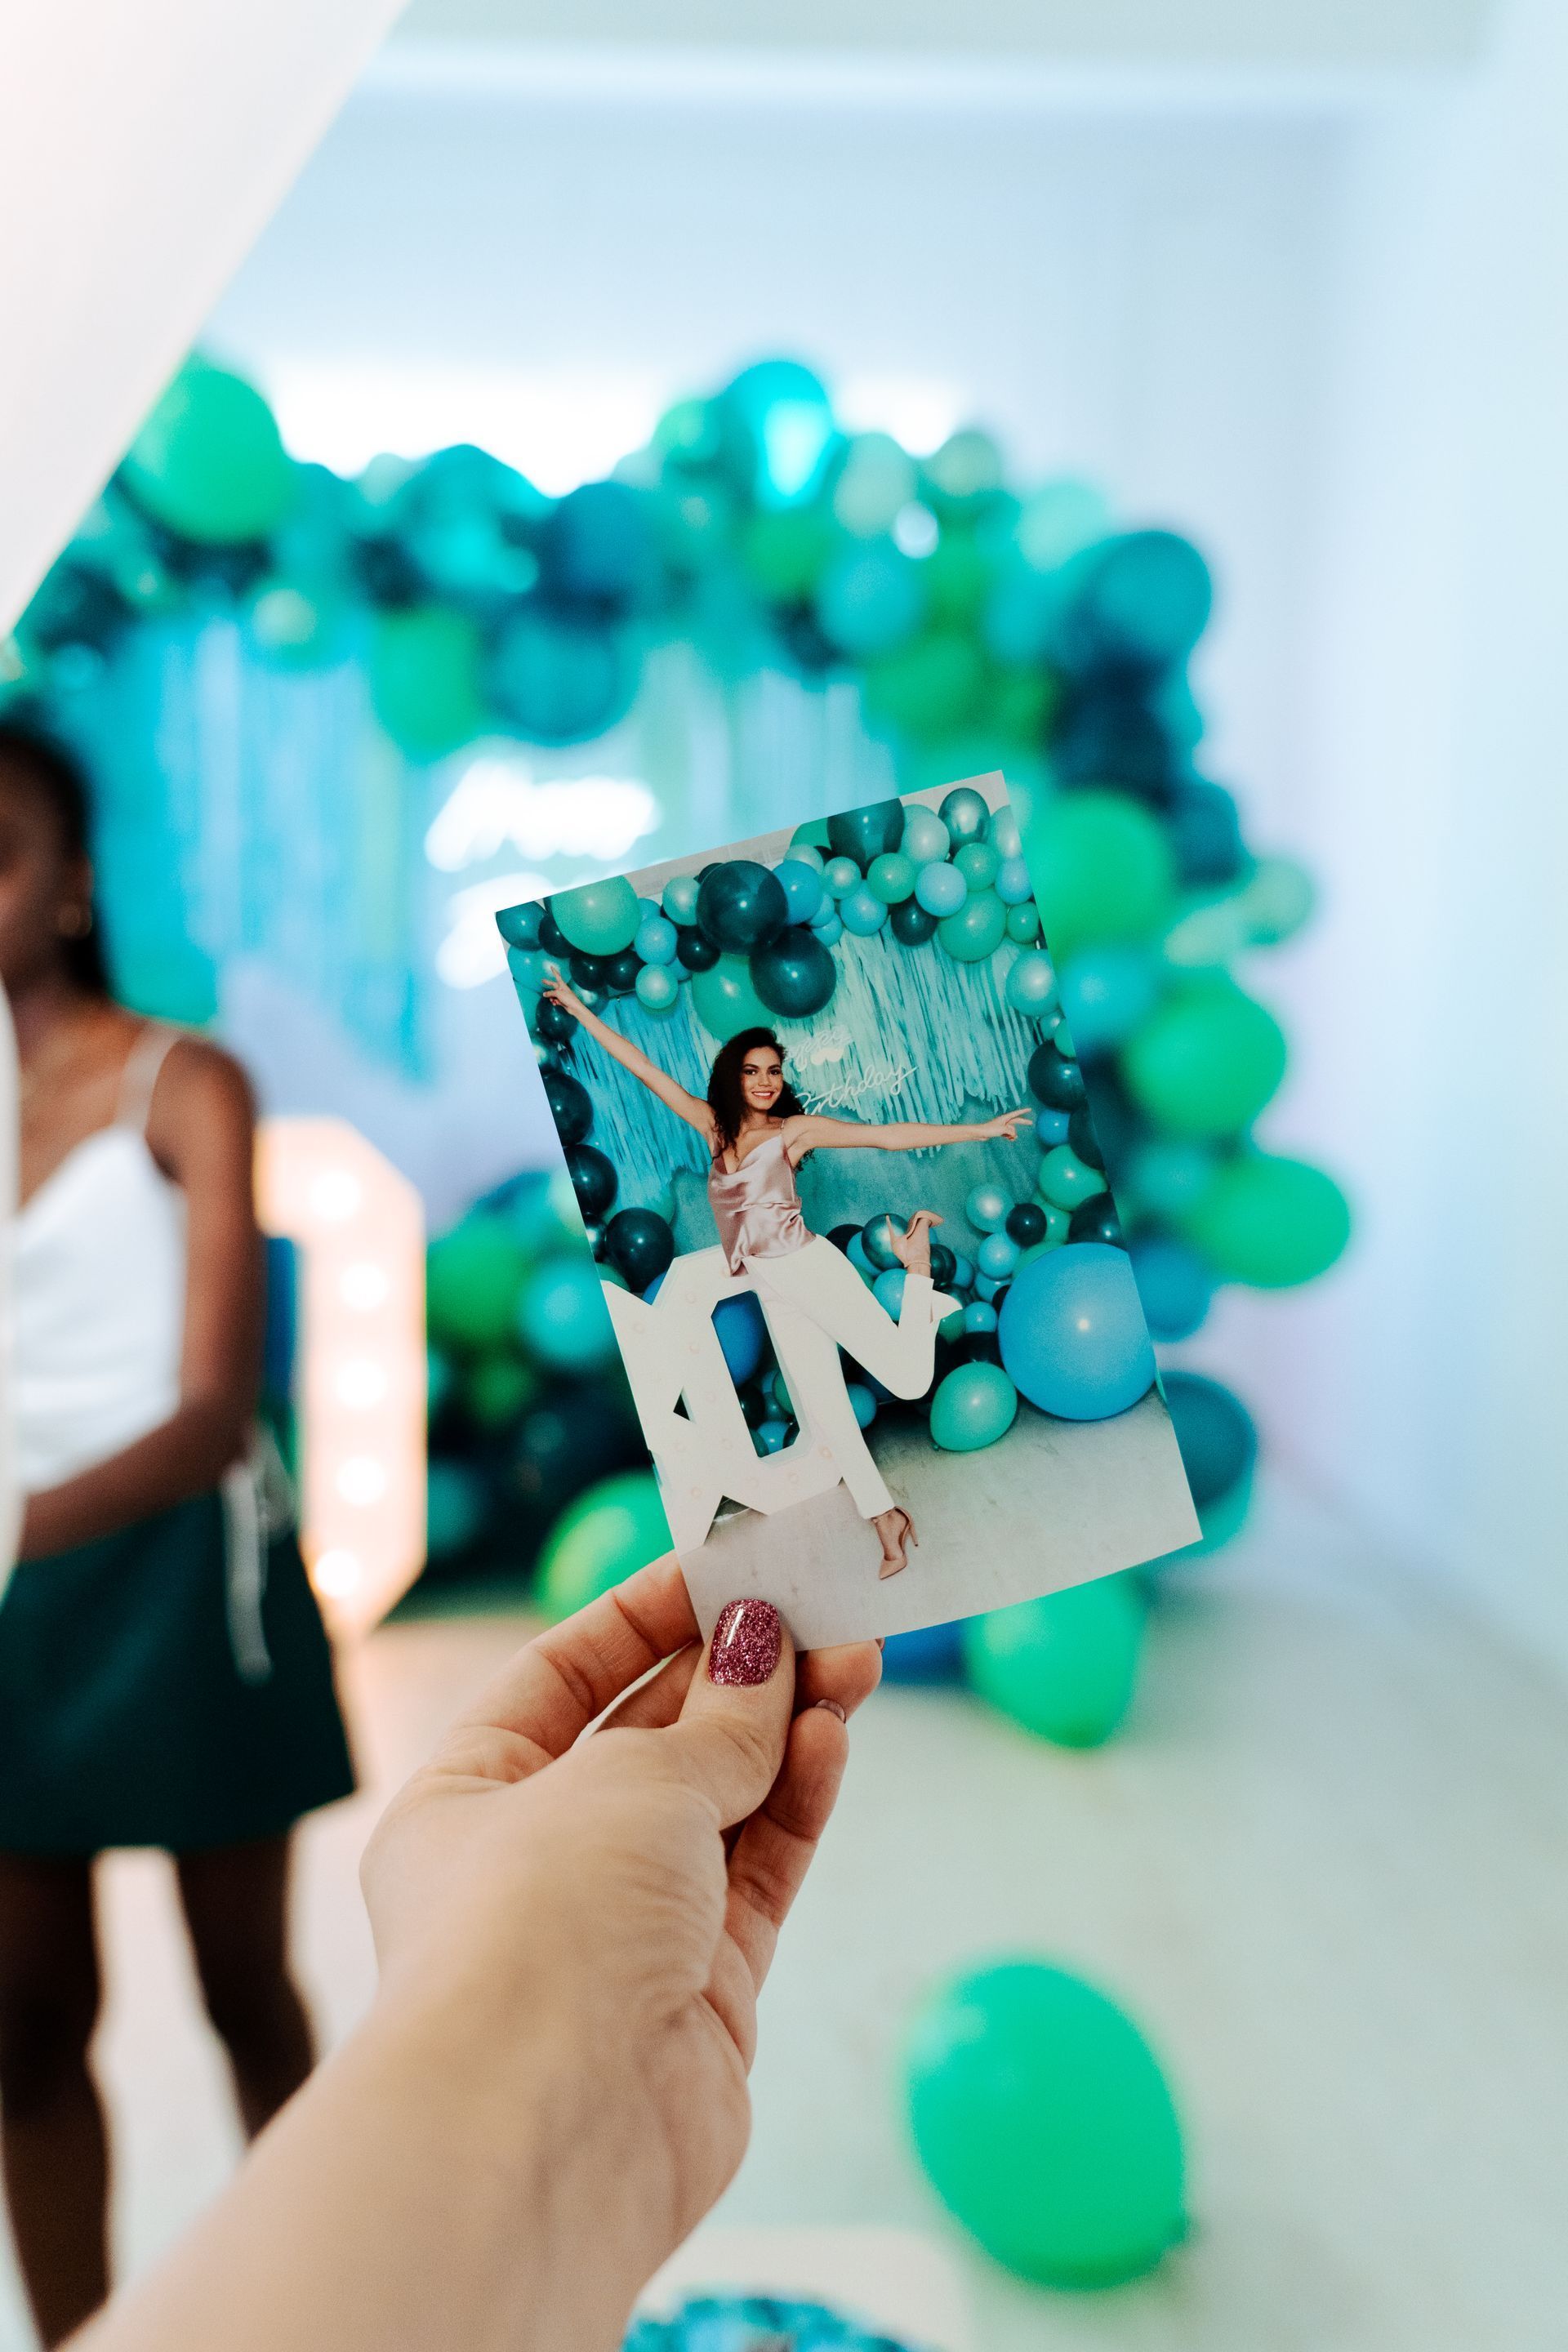 A person is holding a picture of a woman in front of balloons